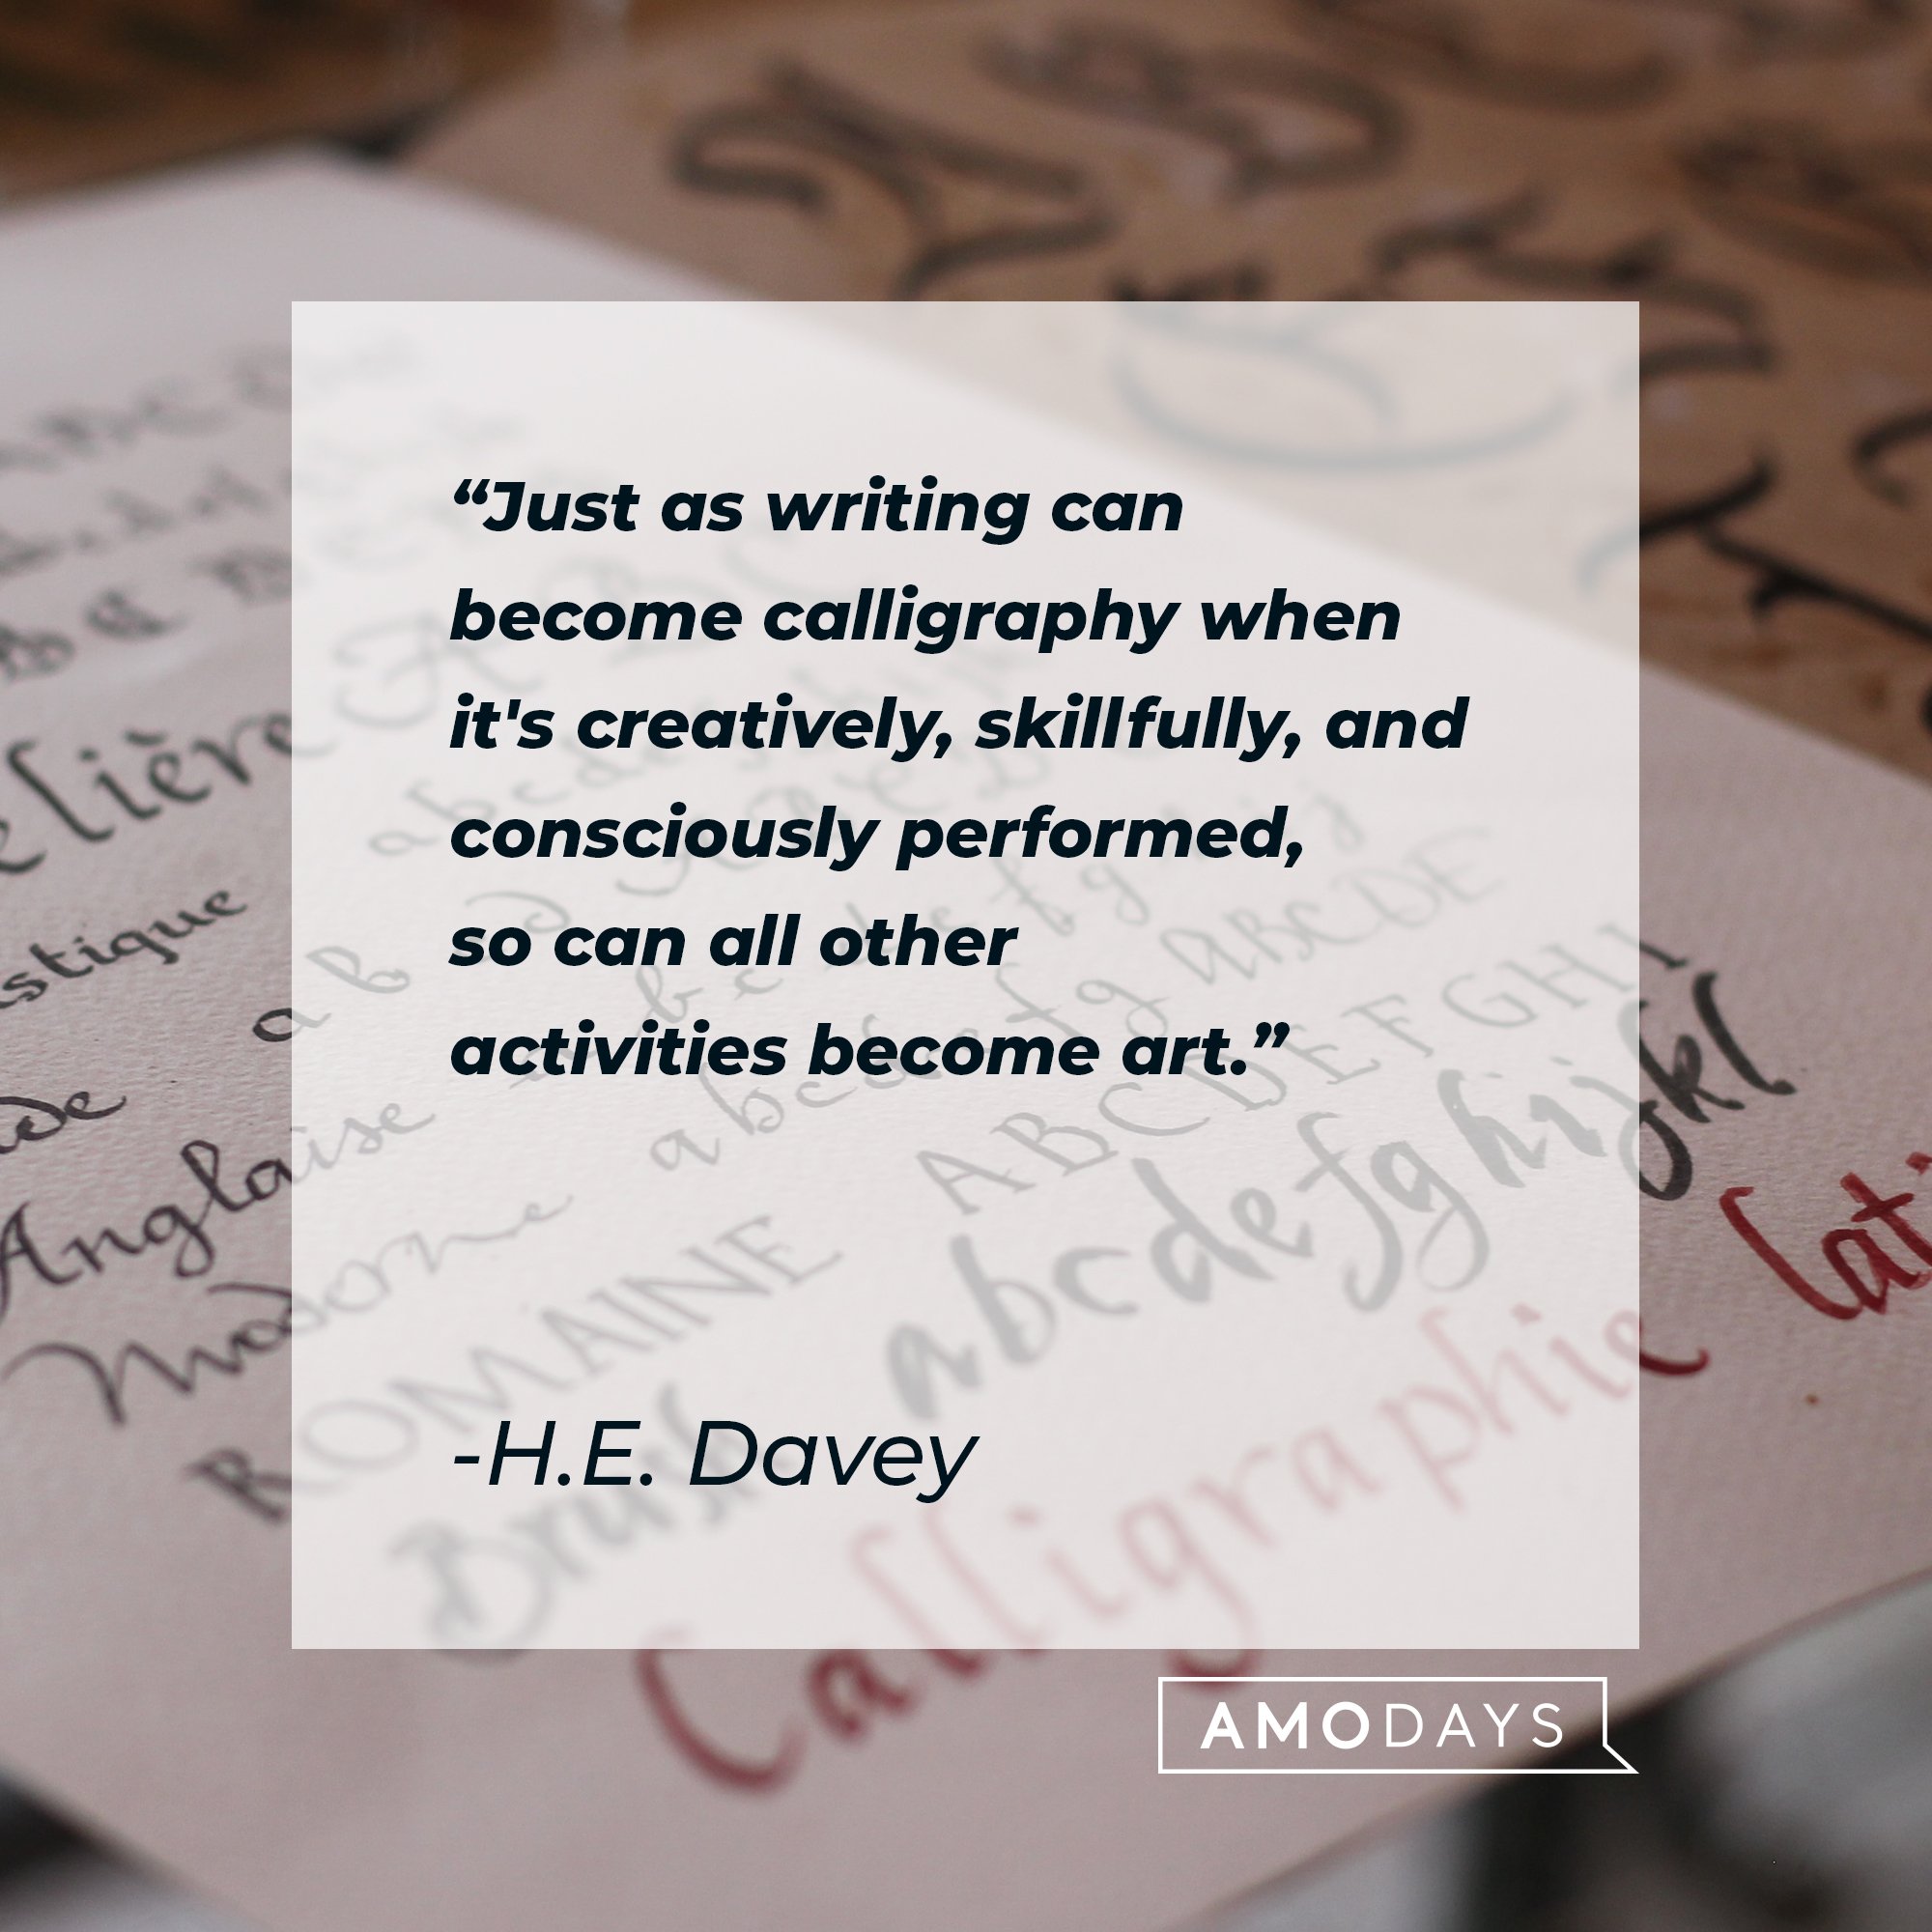 H.E. Davey’s quote: "Just as writing can become calligraphy when it's creatively, skillfully, and consciously performed, so can all other activities become art." | Image: AmoDays  